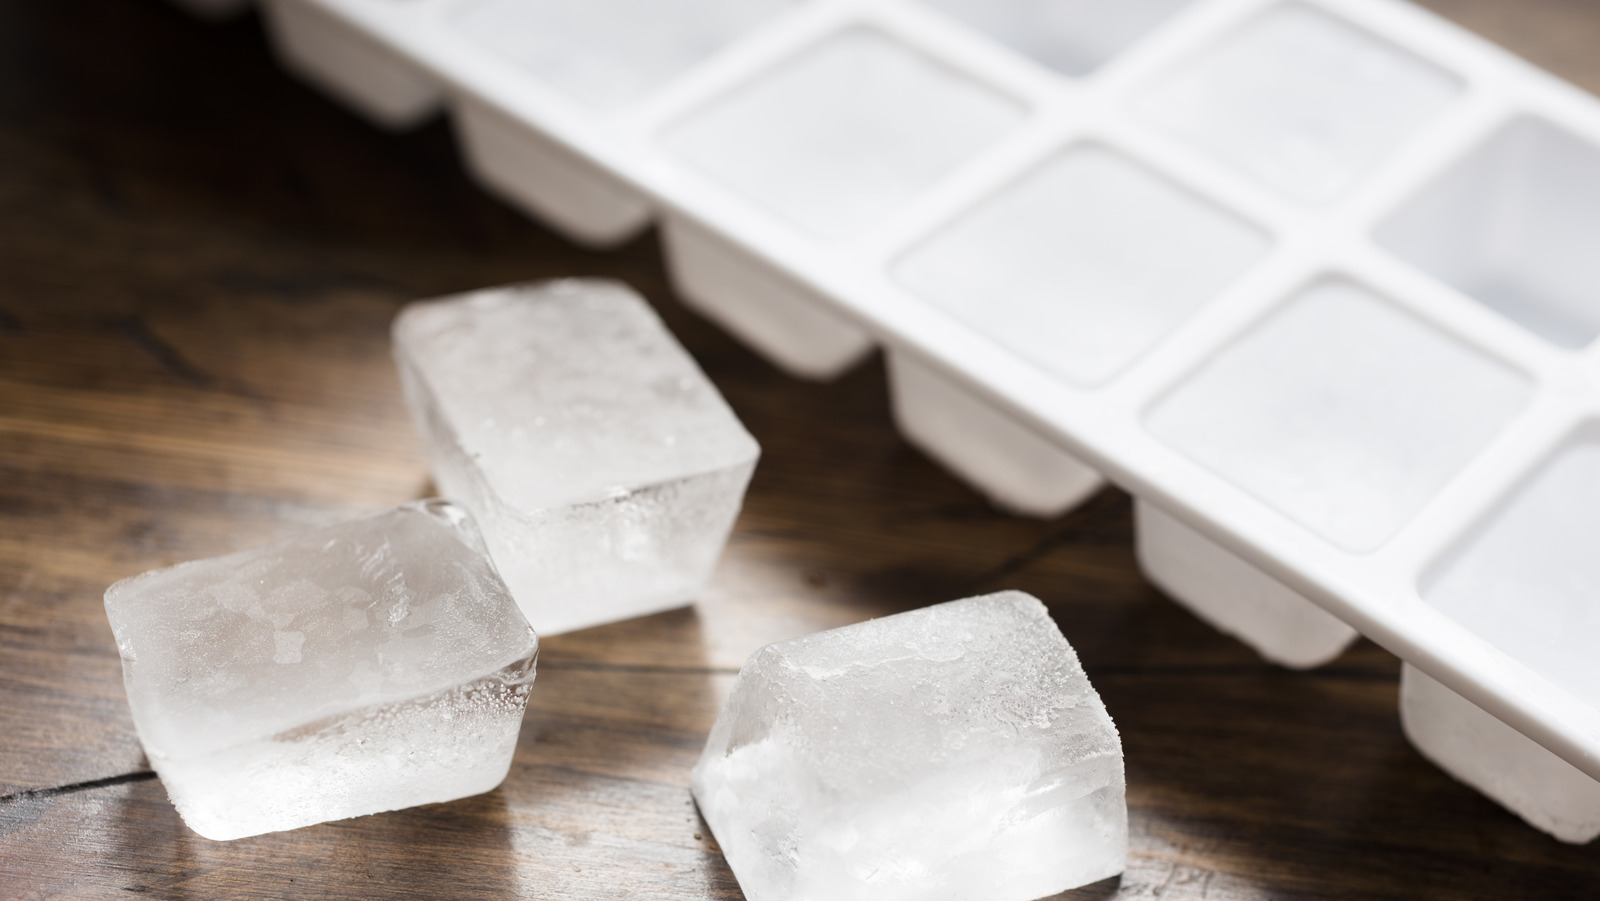 https://www.foodrepublic.com/img/gallery/all-you-need-to-clean-your-garbage-disposal-is-a-tray-of-ice-cubes/l-intro-1696625377.jpg